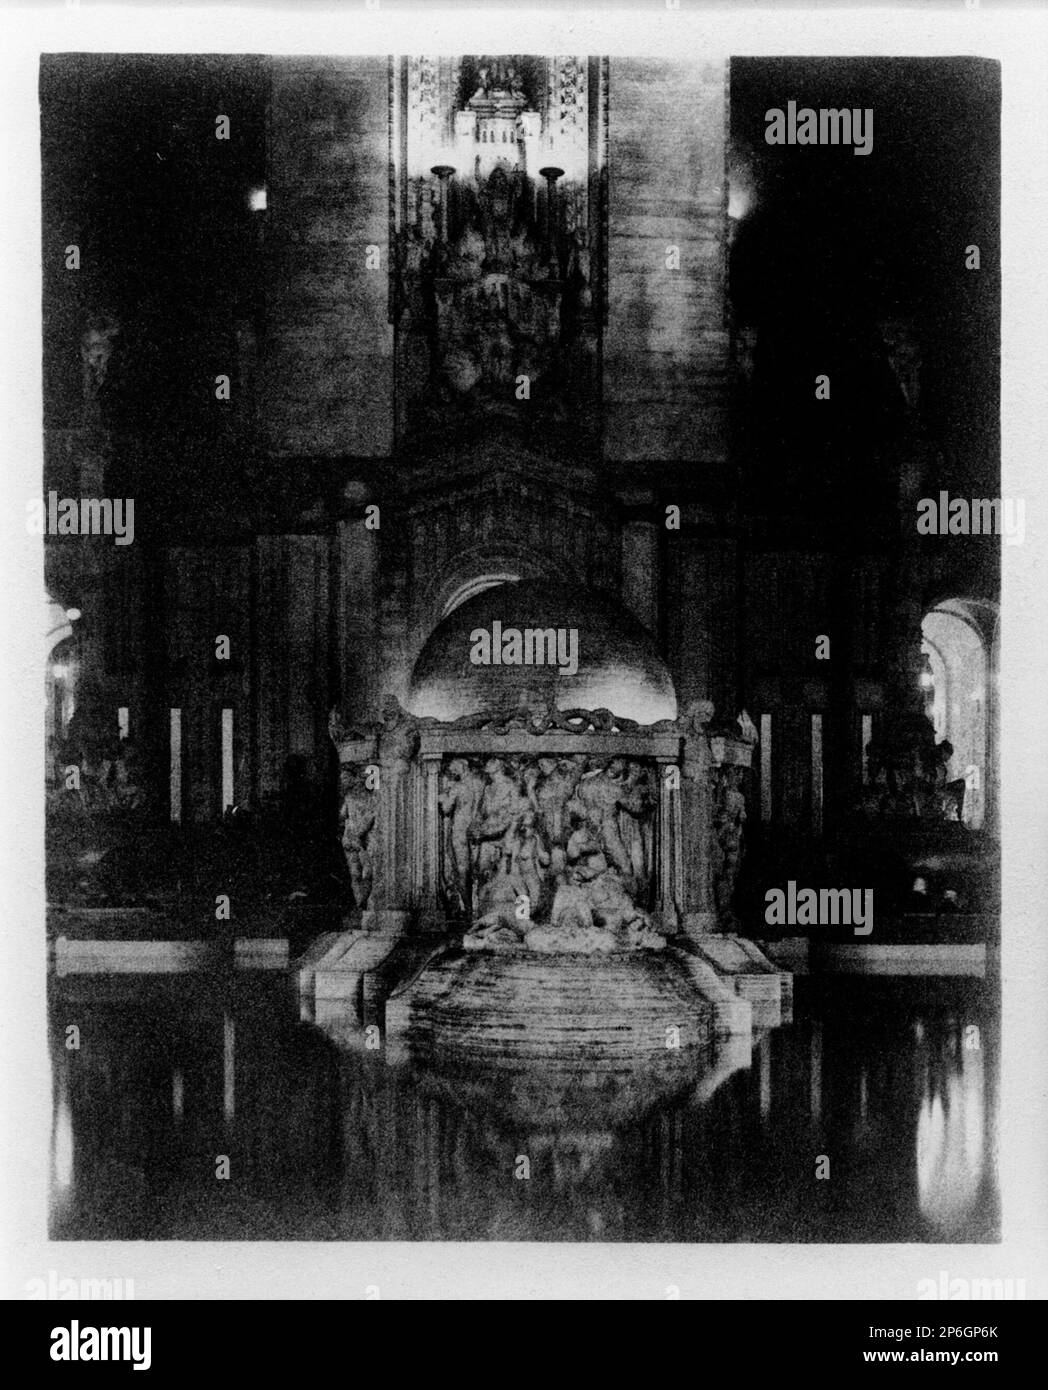 Emil O. Jellink, Fountain of Earth, Court of Ages (a.k.a. Court of Abundance), Panama-Pacific Exposition, San Francisco, c. 1915, bromoil transfer print. Stock Photo